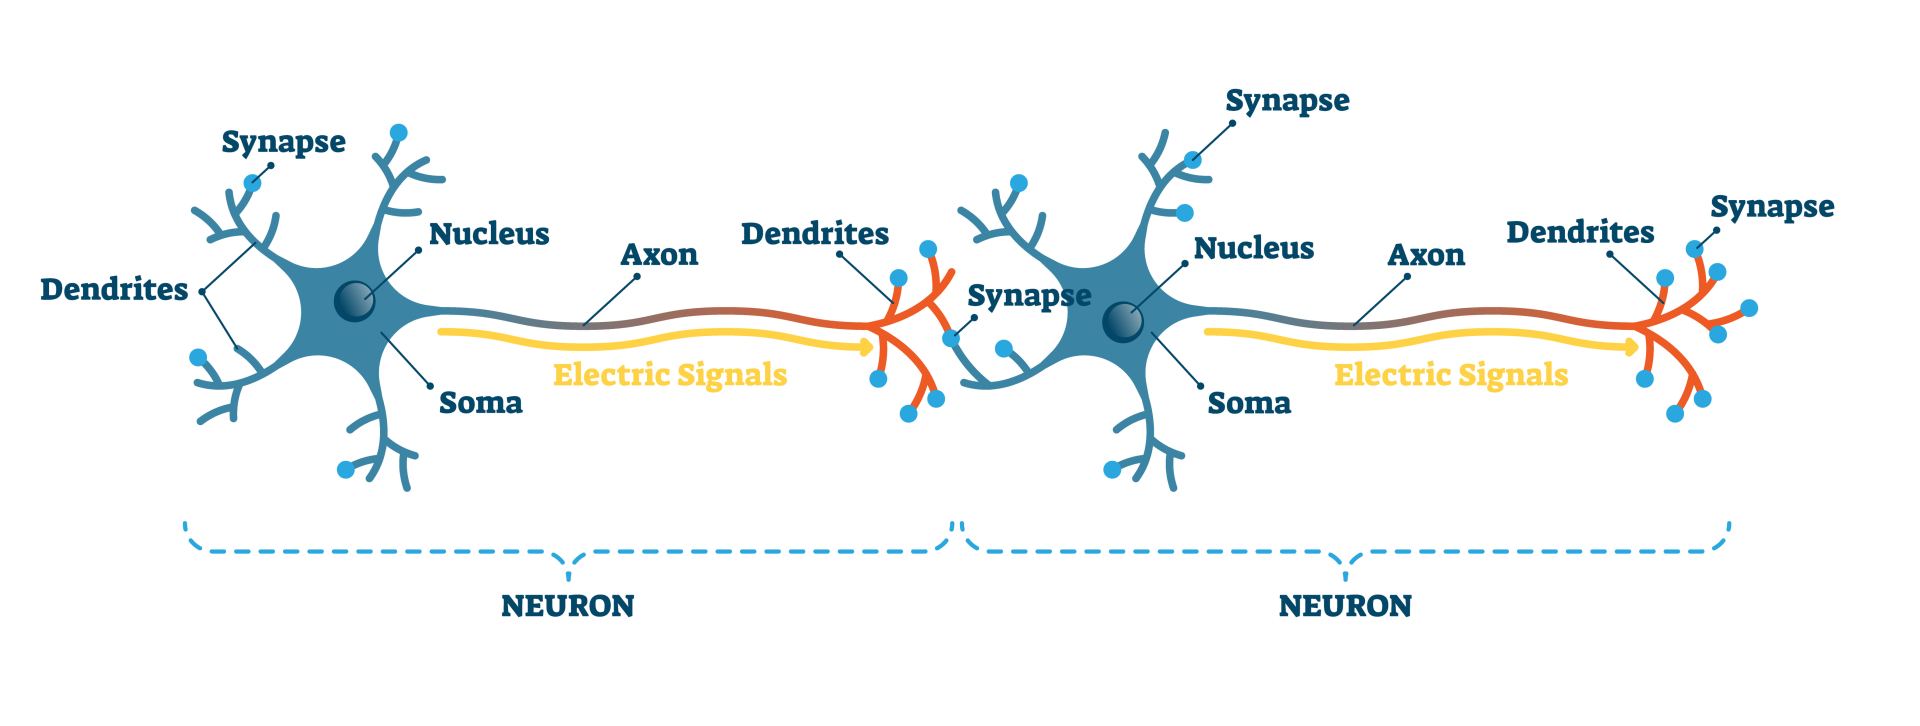 At a synapse the presynaptic (sending) neuron causes the transmission of a signal to the postsynaptic (receiving) neuron